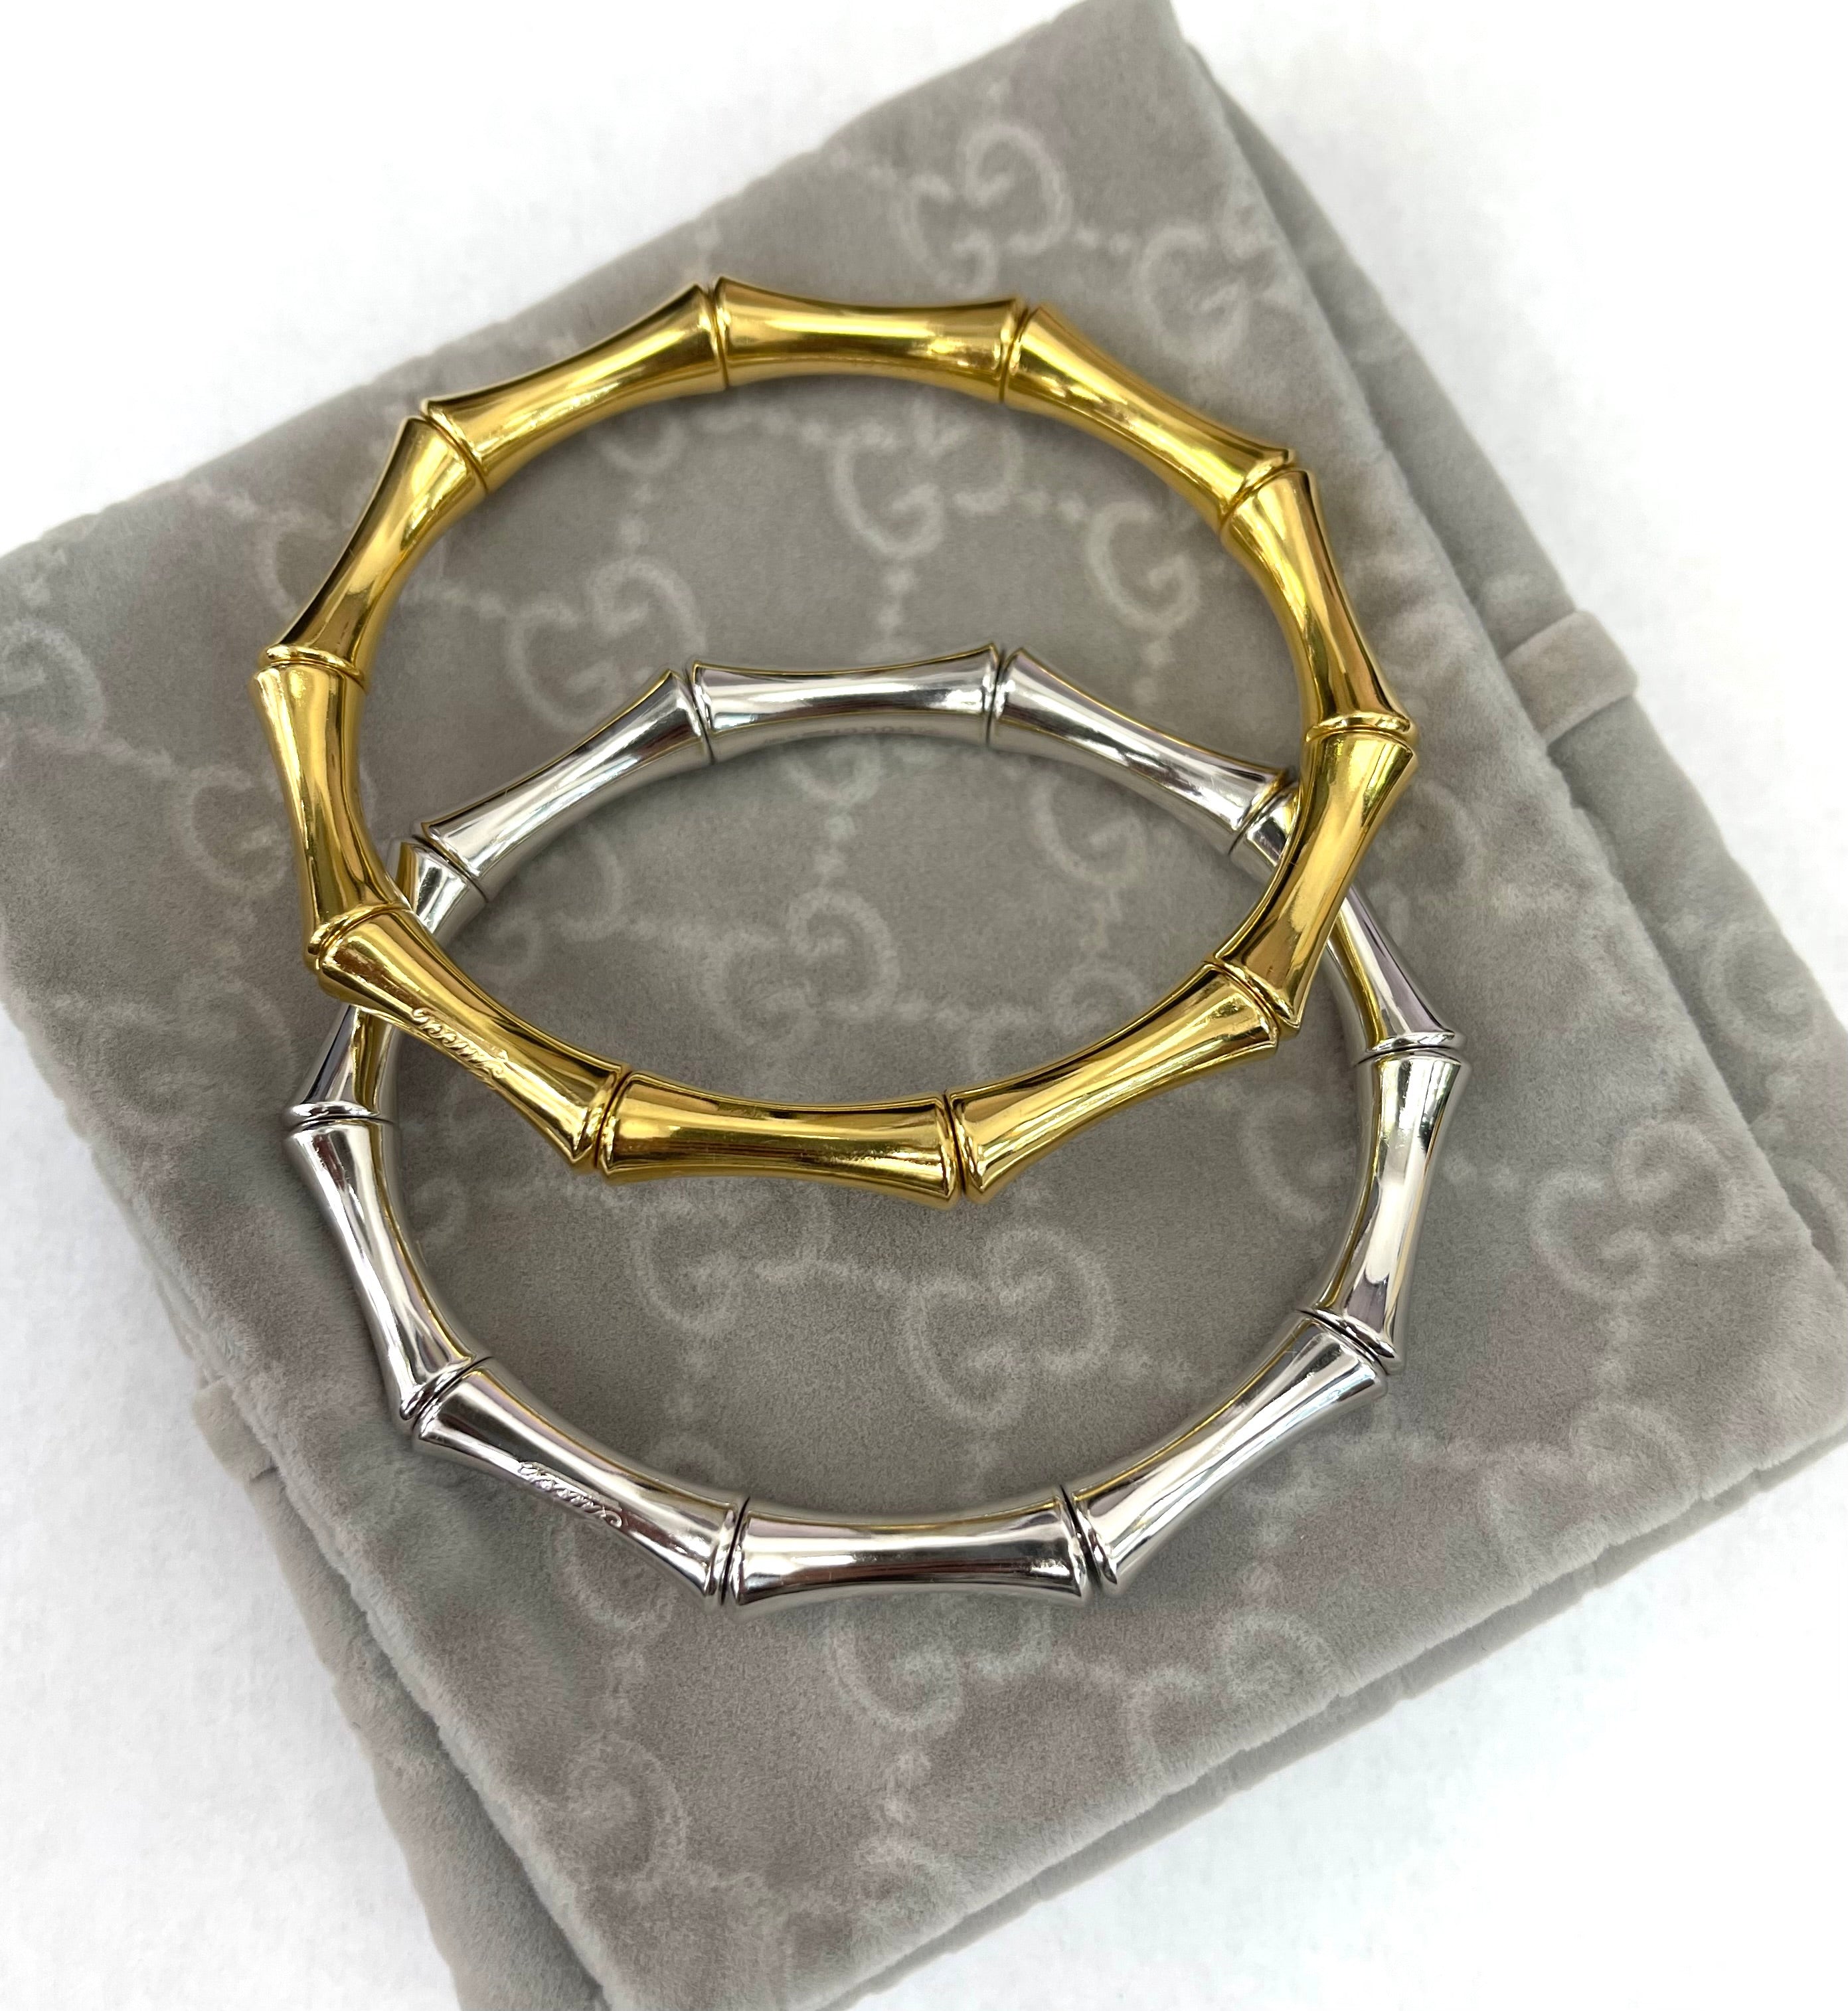 Gucci Bamboo Stretch Bangle Bracelet White and Yellow Gold 18kt